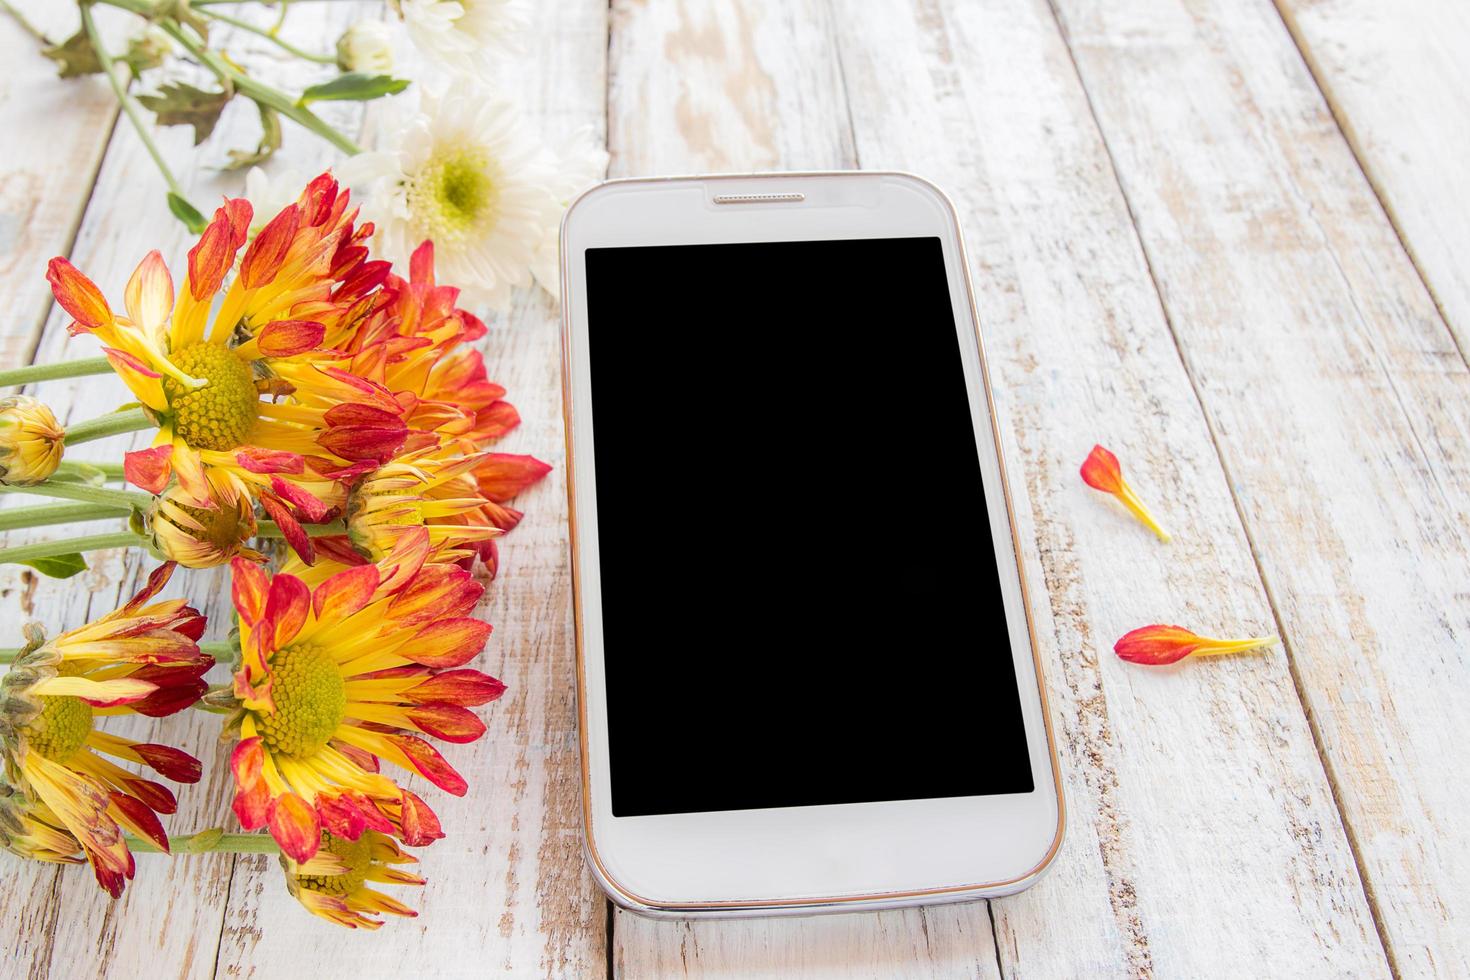 Smart phone and fresh flowers on wood table photo